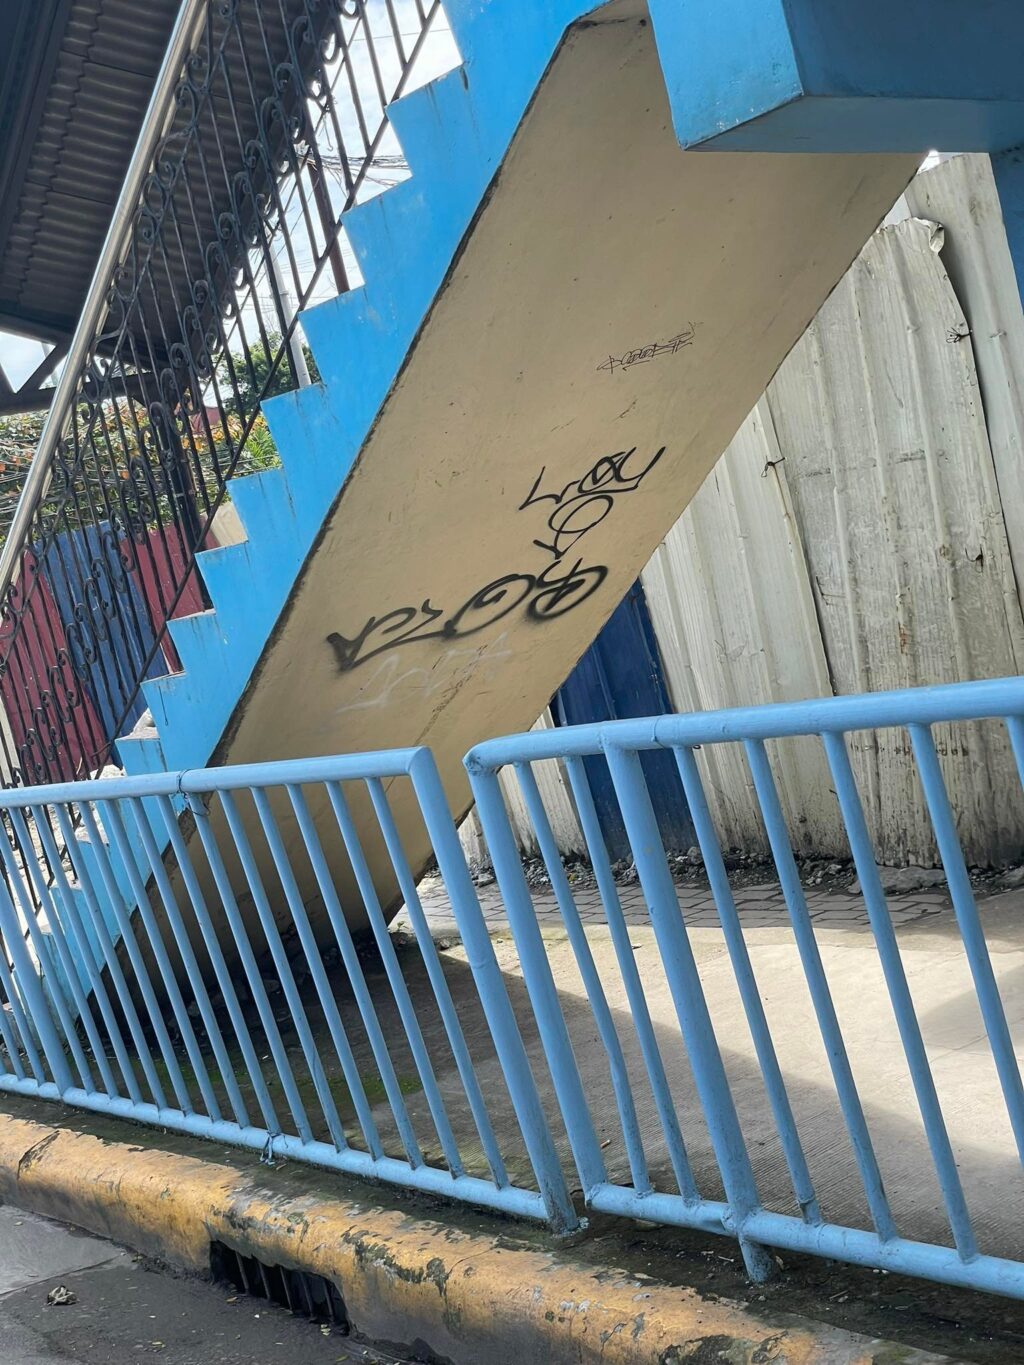 Mayor Junard Chan shares a photo showing the stairs of a skywalk in Lapu-Lapu City that was not spared by vandals.